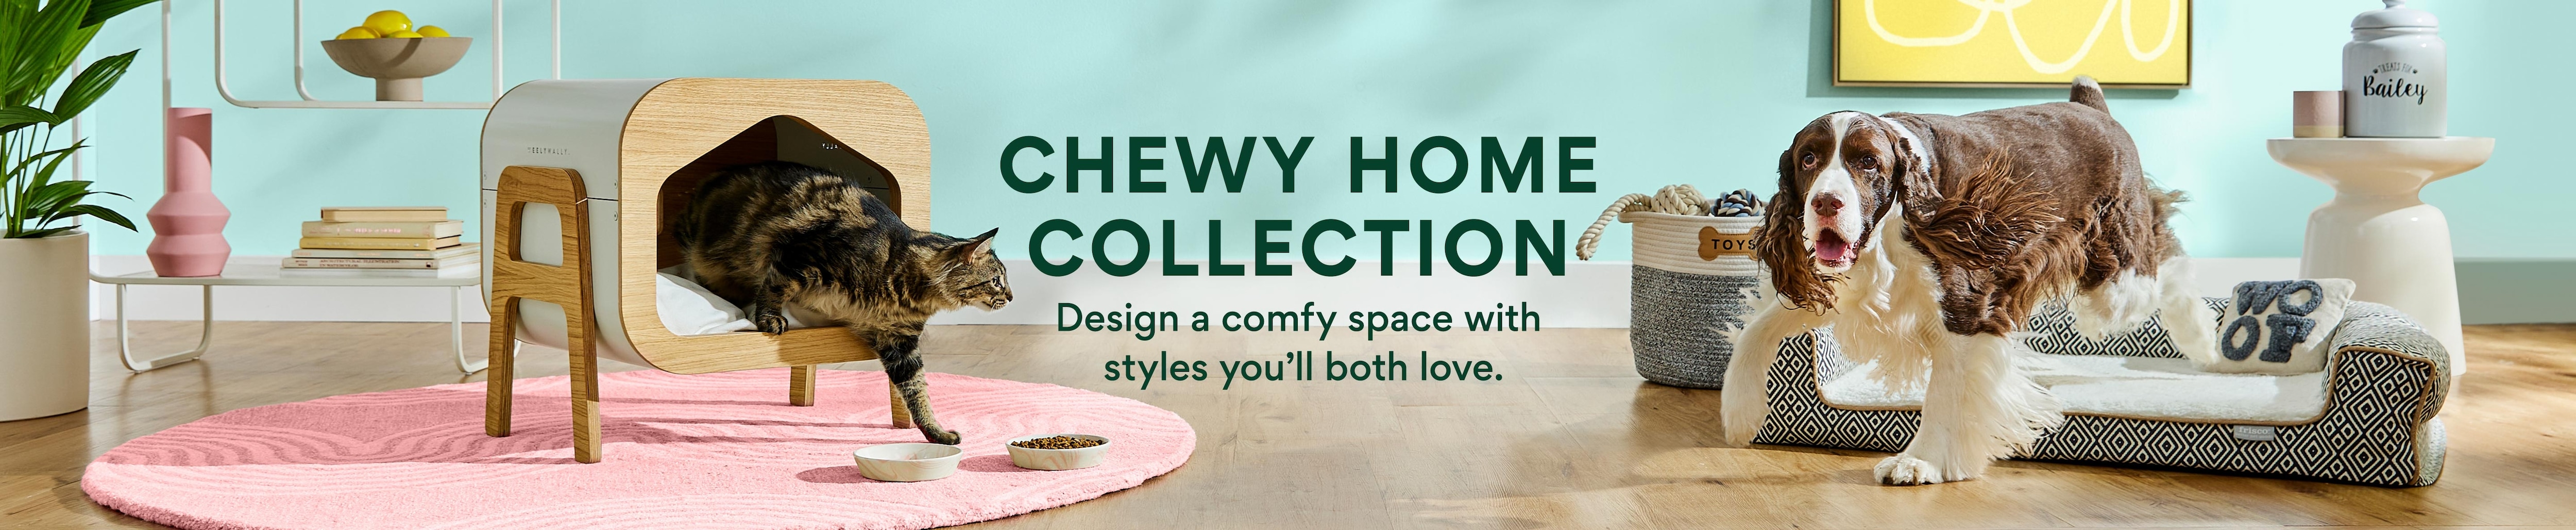 Chewy Home Collection. Design a comfy space with styles you'll both love.